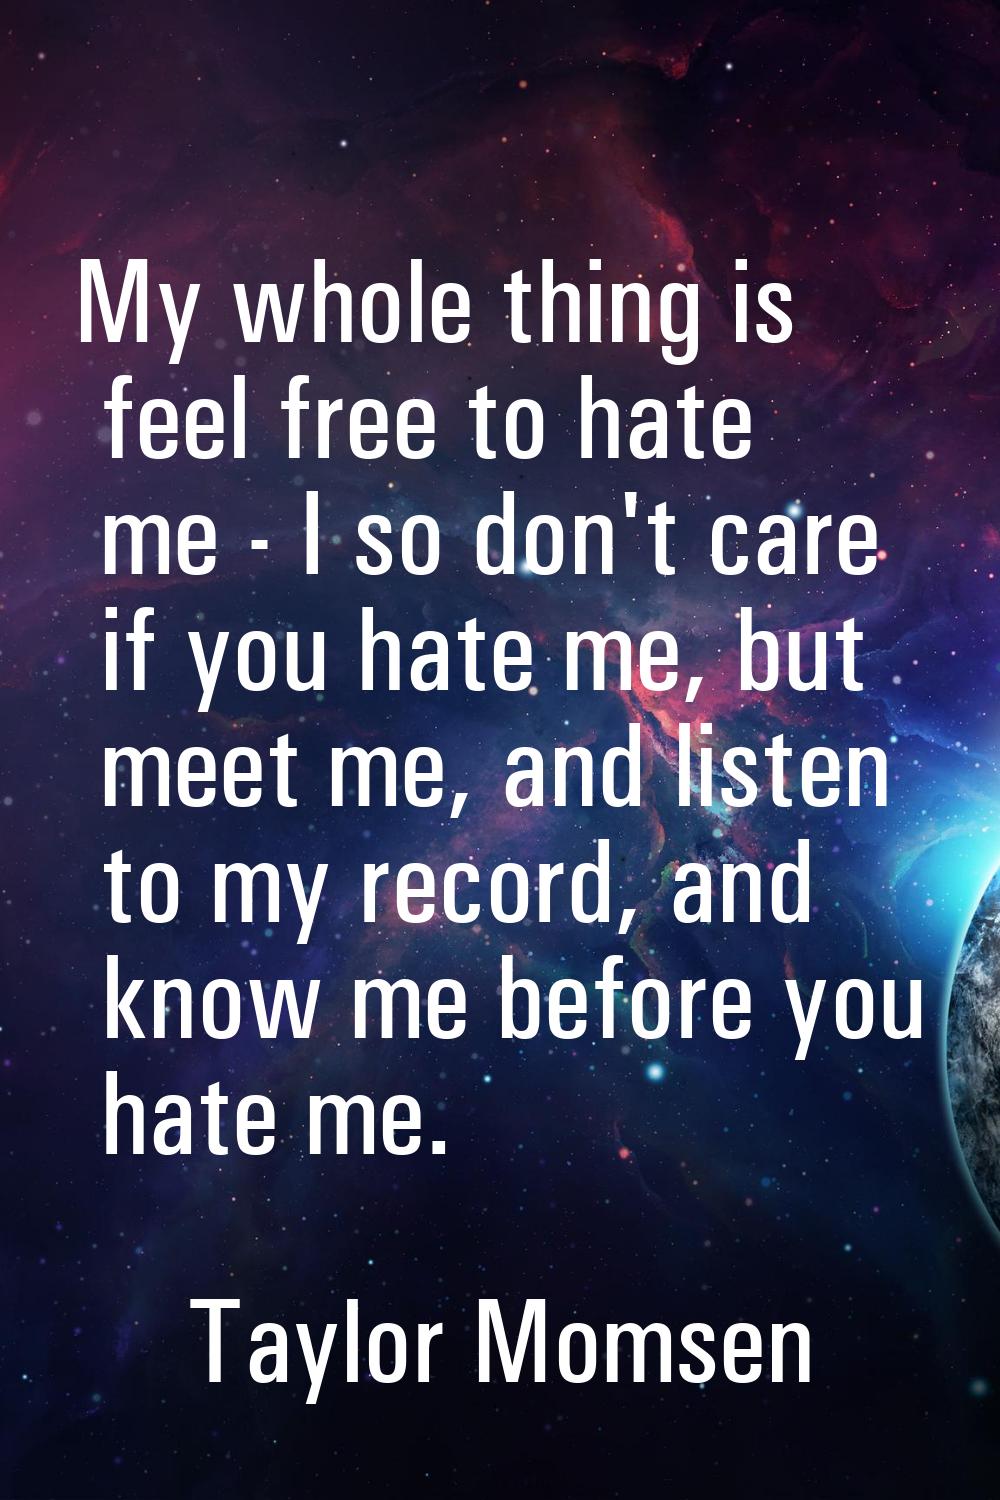 My whole thing is feel free to hate me - I so don't care if you hate me, but meet me, and listen to